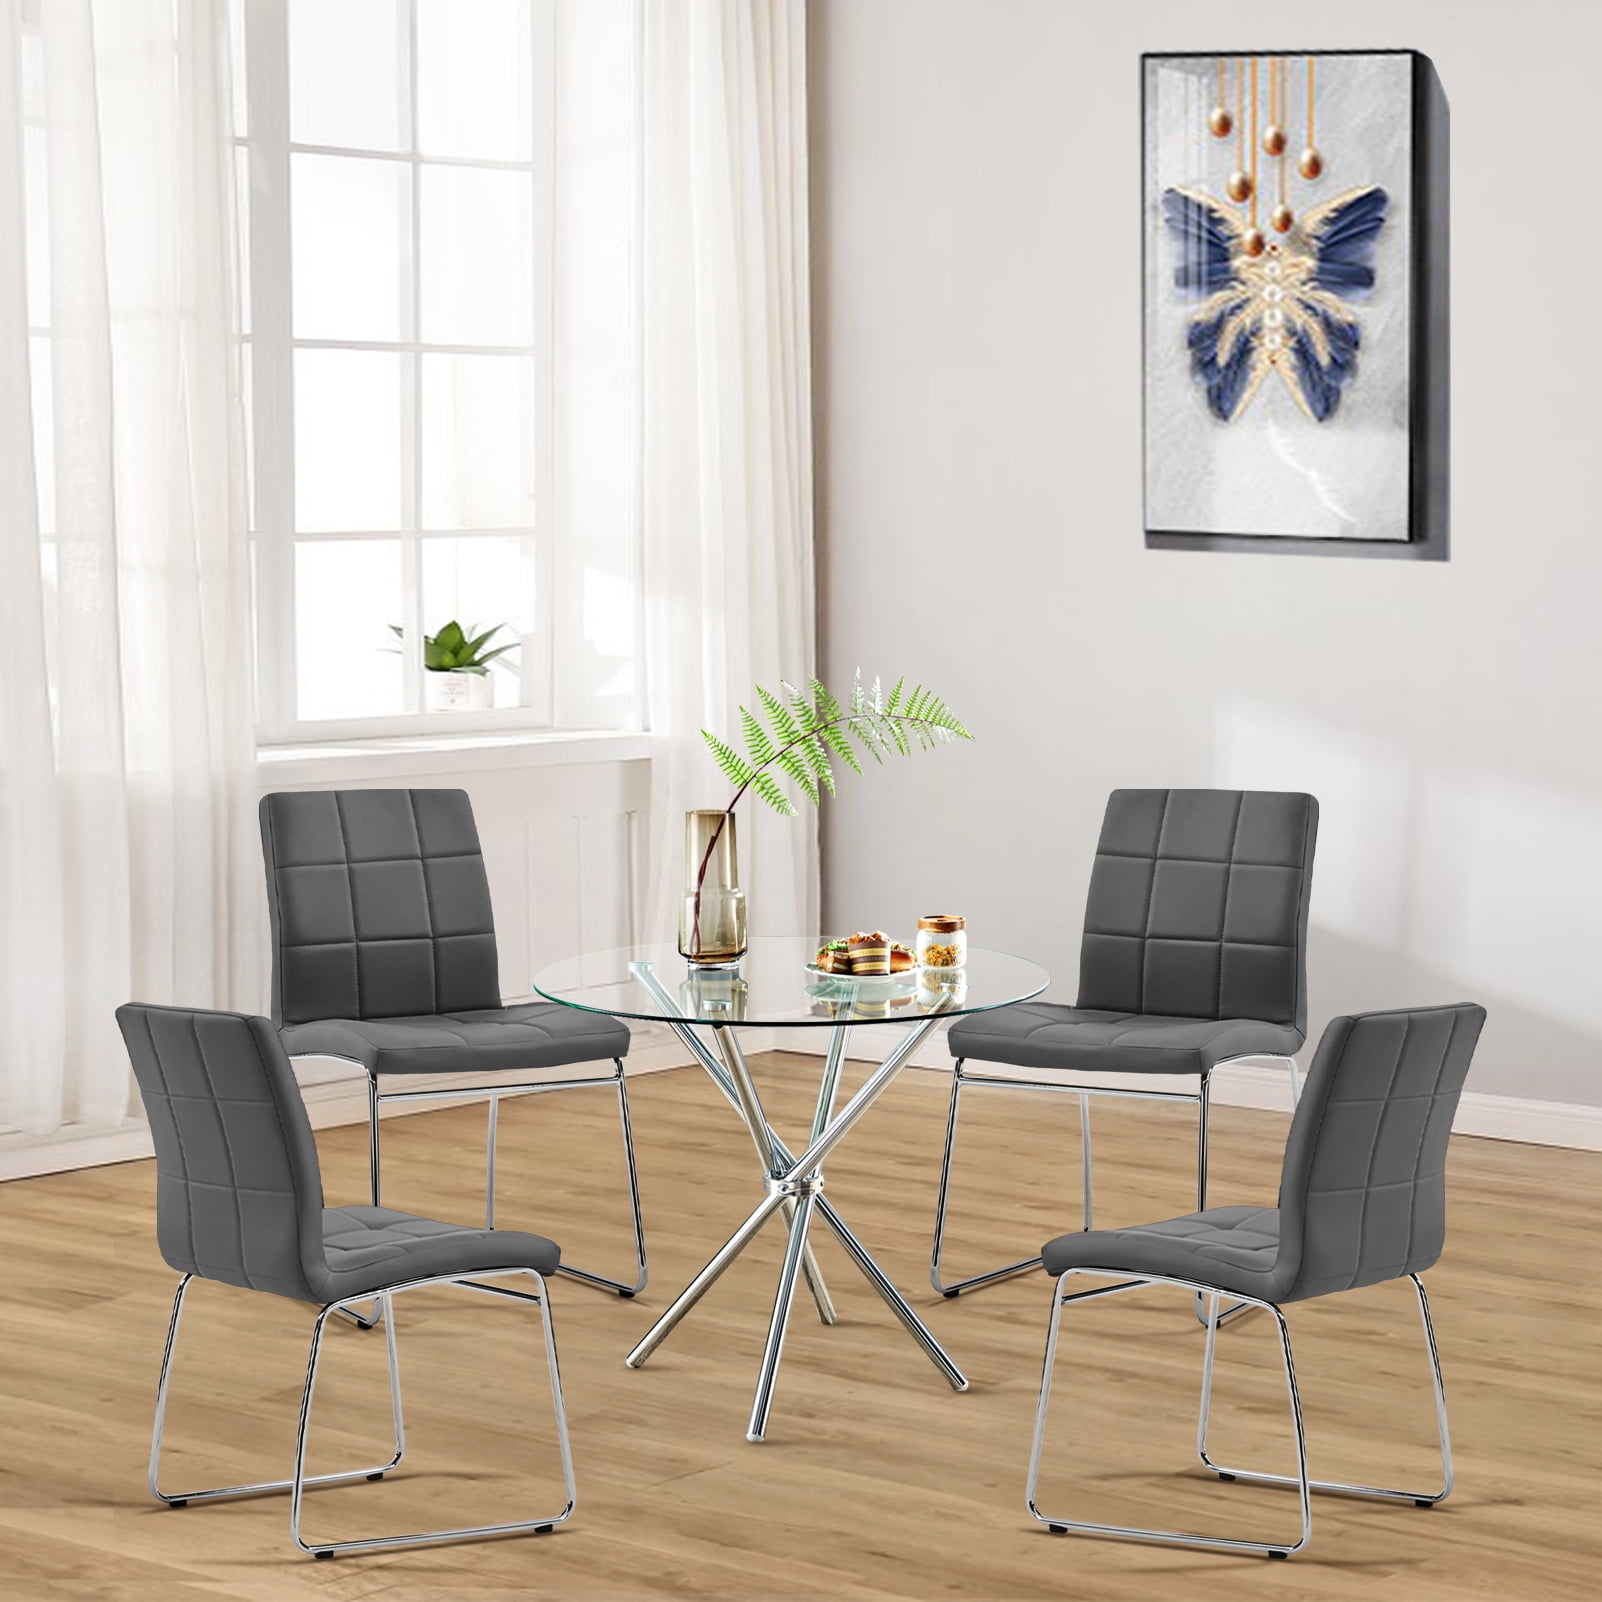 GIZZA Small Round Glass Dining Table and Chairs Set of 2 Modern Kitchen Corner Table and 4 Grey Distressed Faux Leather Chair Silver Chrome Cantilever Base,for Living Room Lounge Office Decoration 